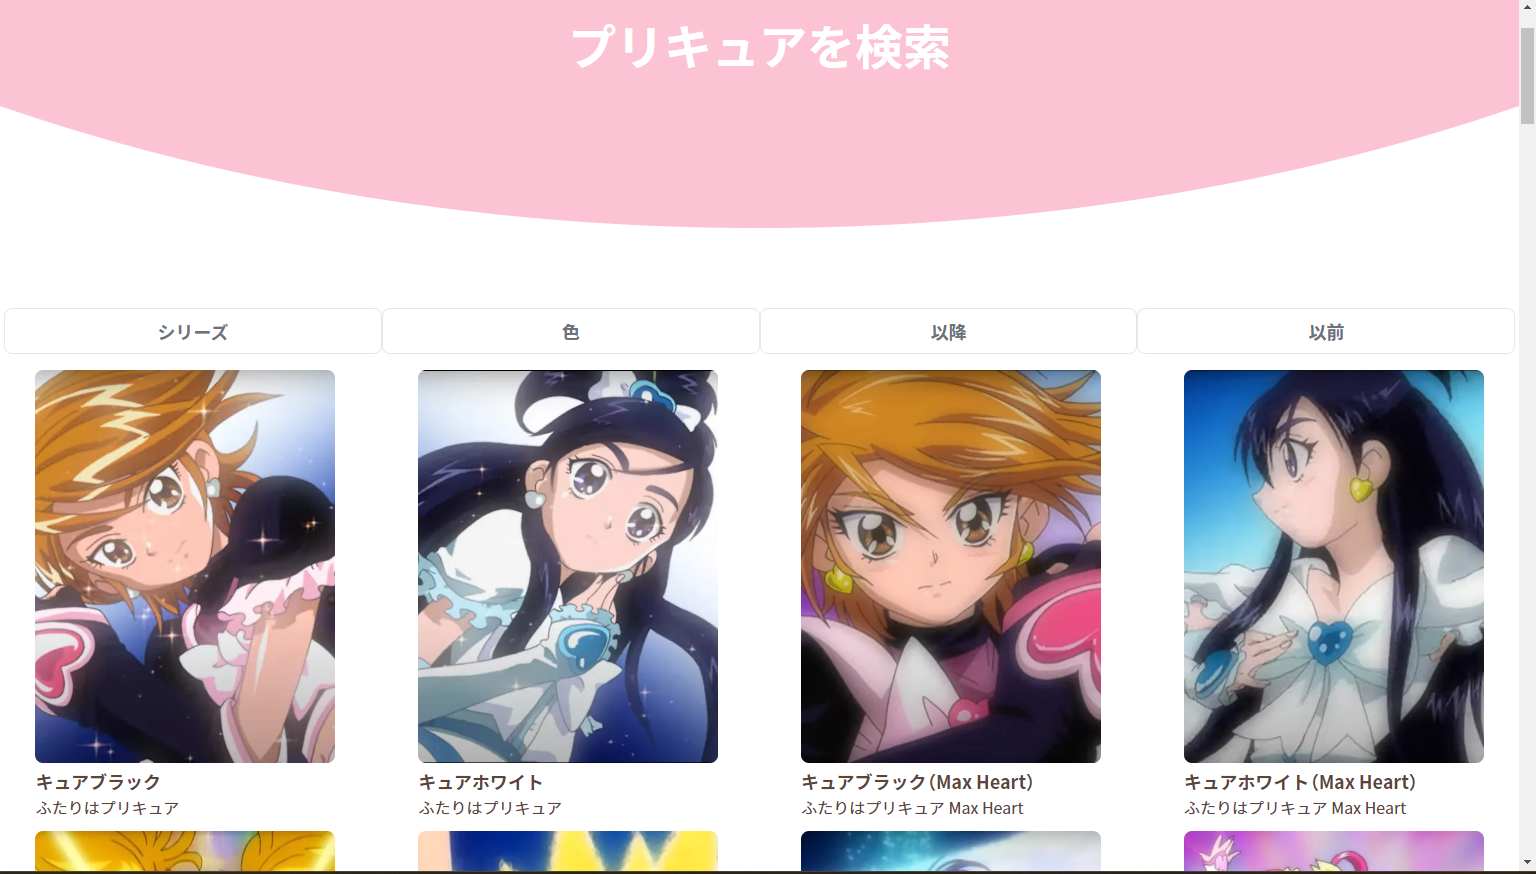 precure-database1.png